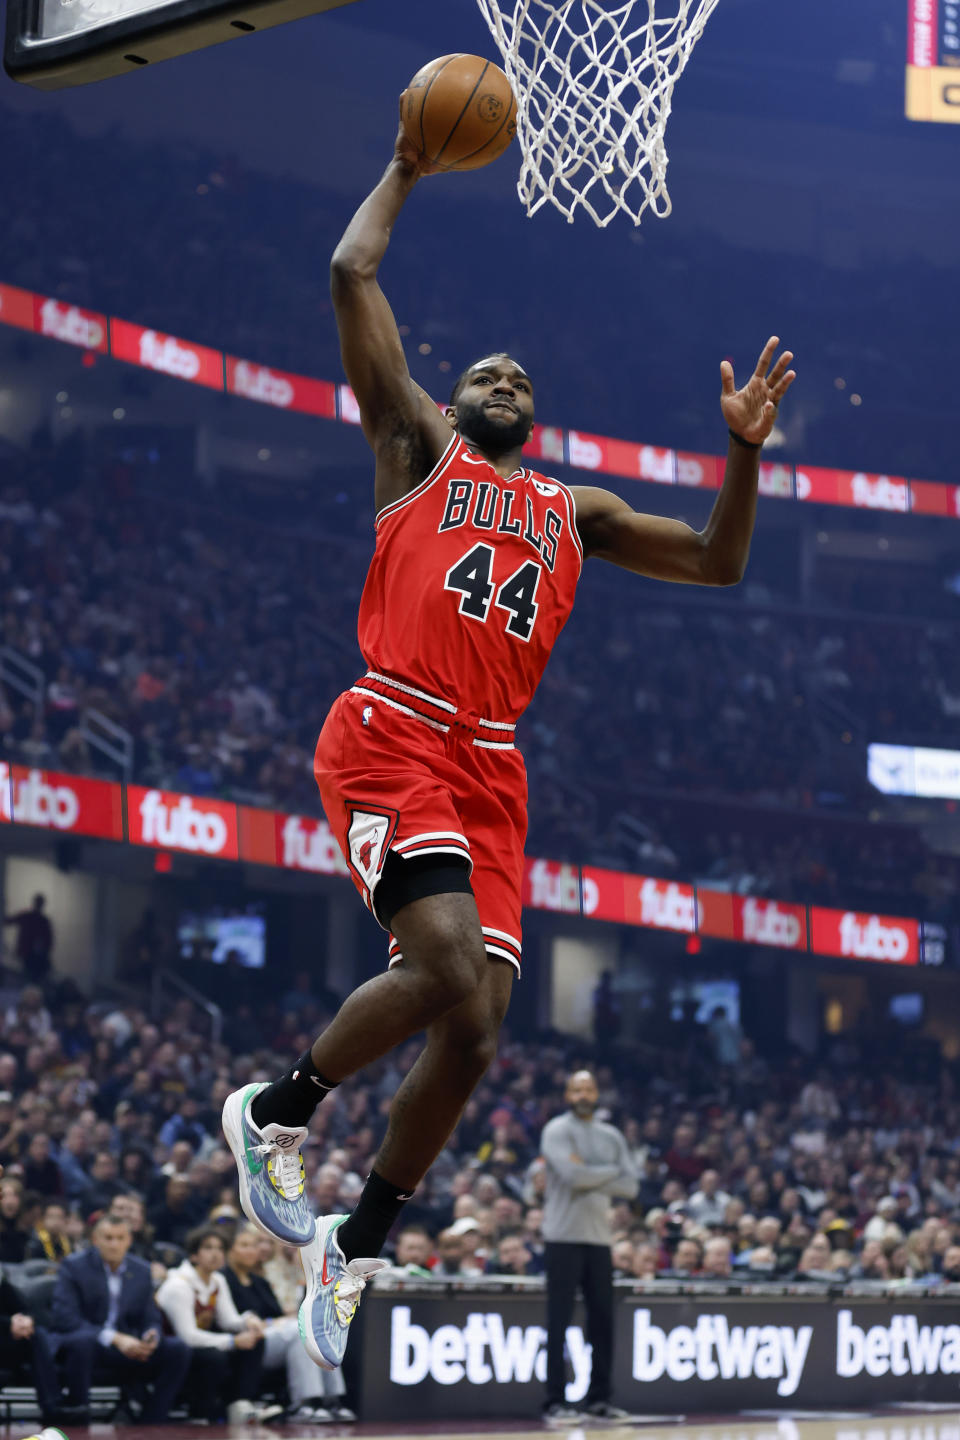 Chicago Bulls forward Patrick Williams dunks against the Cleveland Cavaliers during the first half of an NBA basketball game, Saturday, Feb. 11, 2023, in Cleveland. (AP Photo/Ron Schwane)